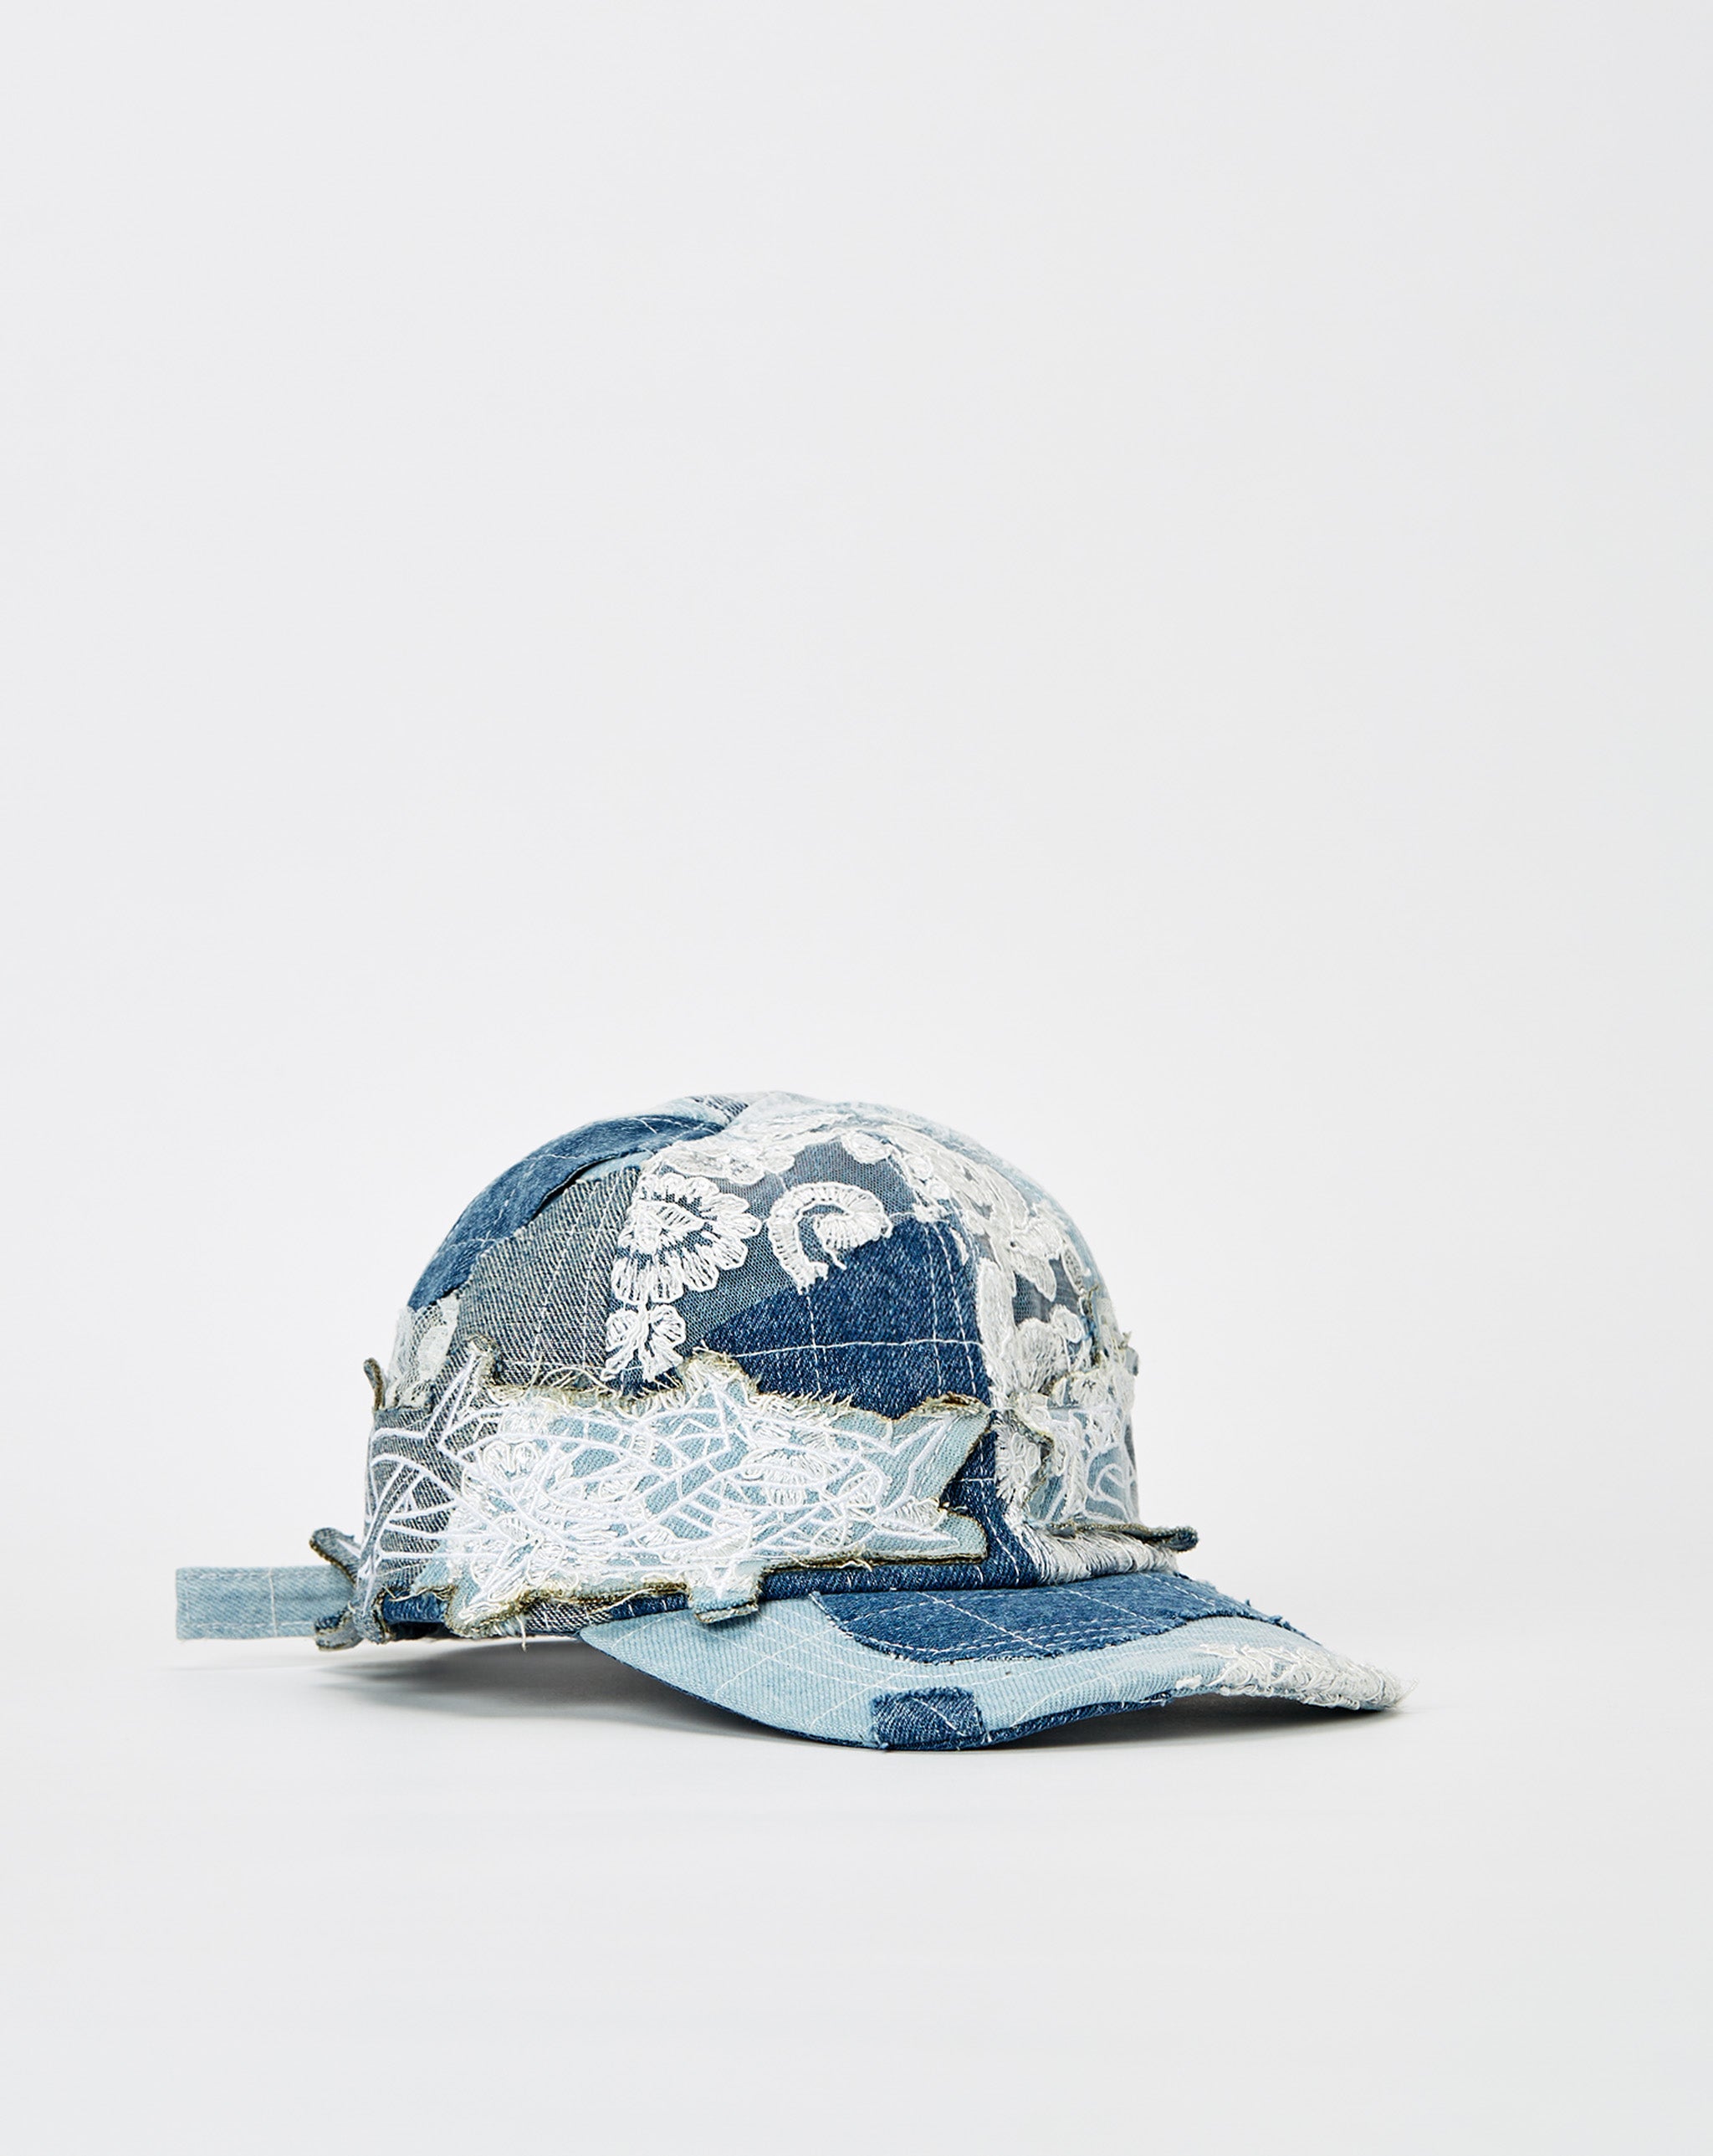 Thorn Wrapped Grid Bucket Hat Thorn Grid Cap  - Cheap Cerbe Jordan outlet